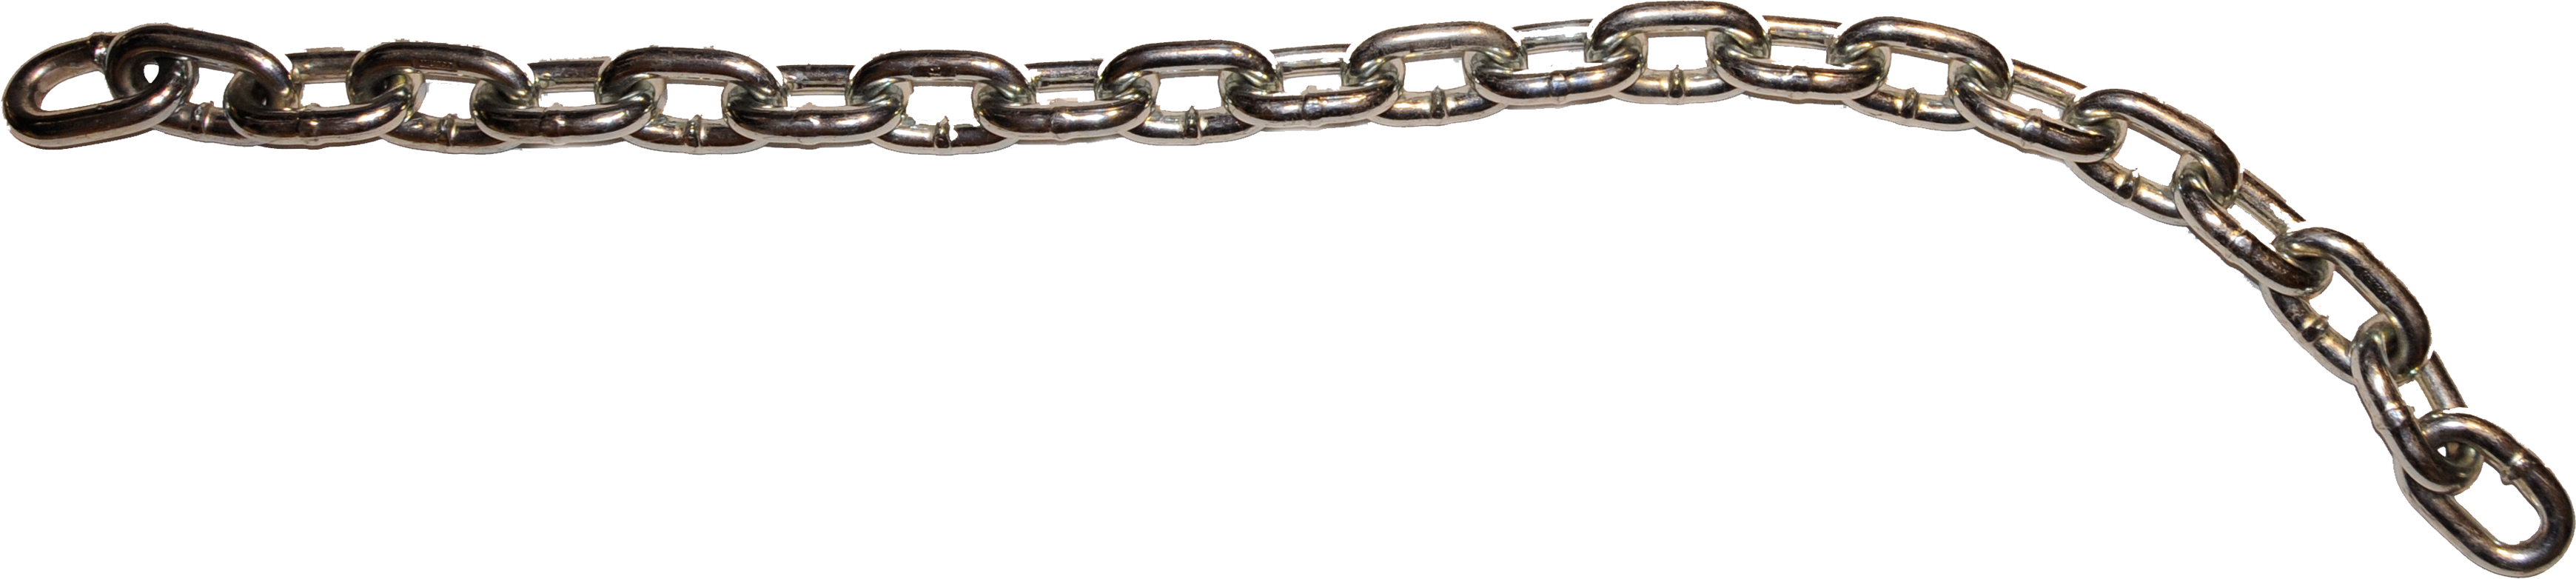 Chain PNG - 2179